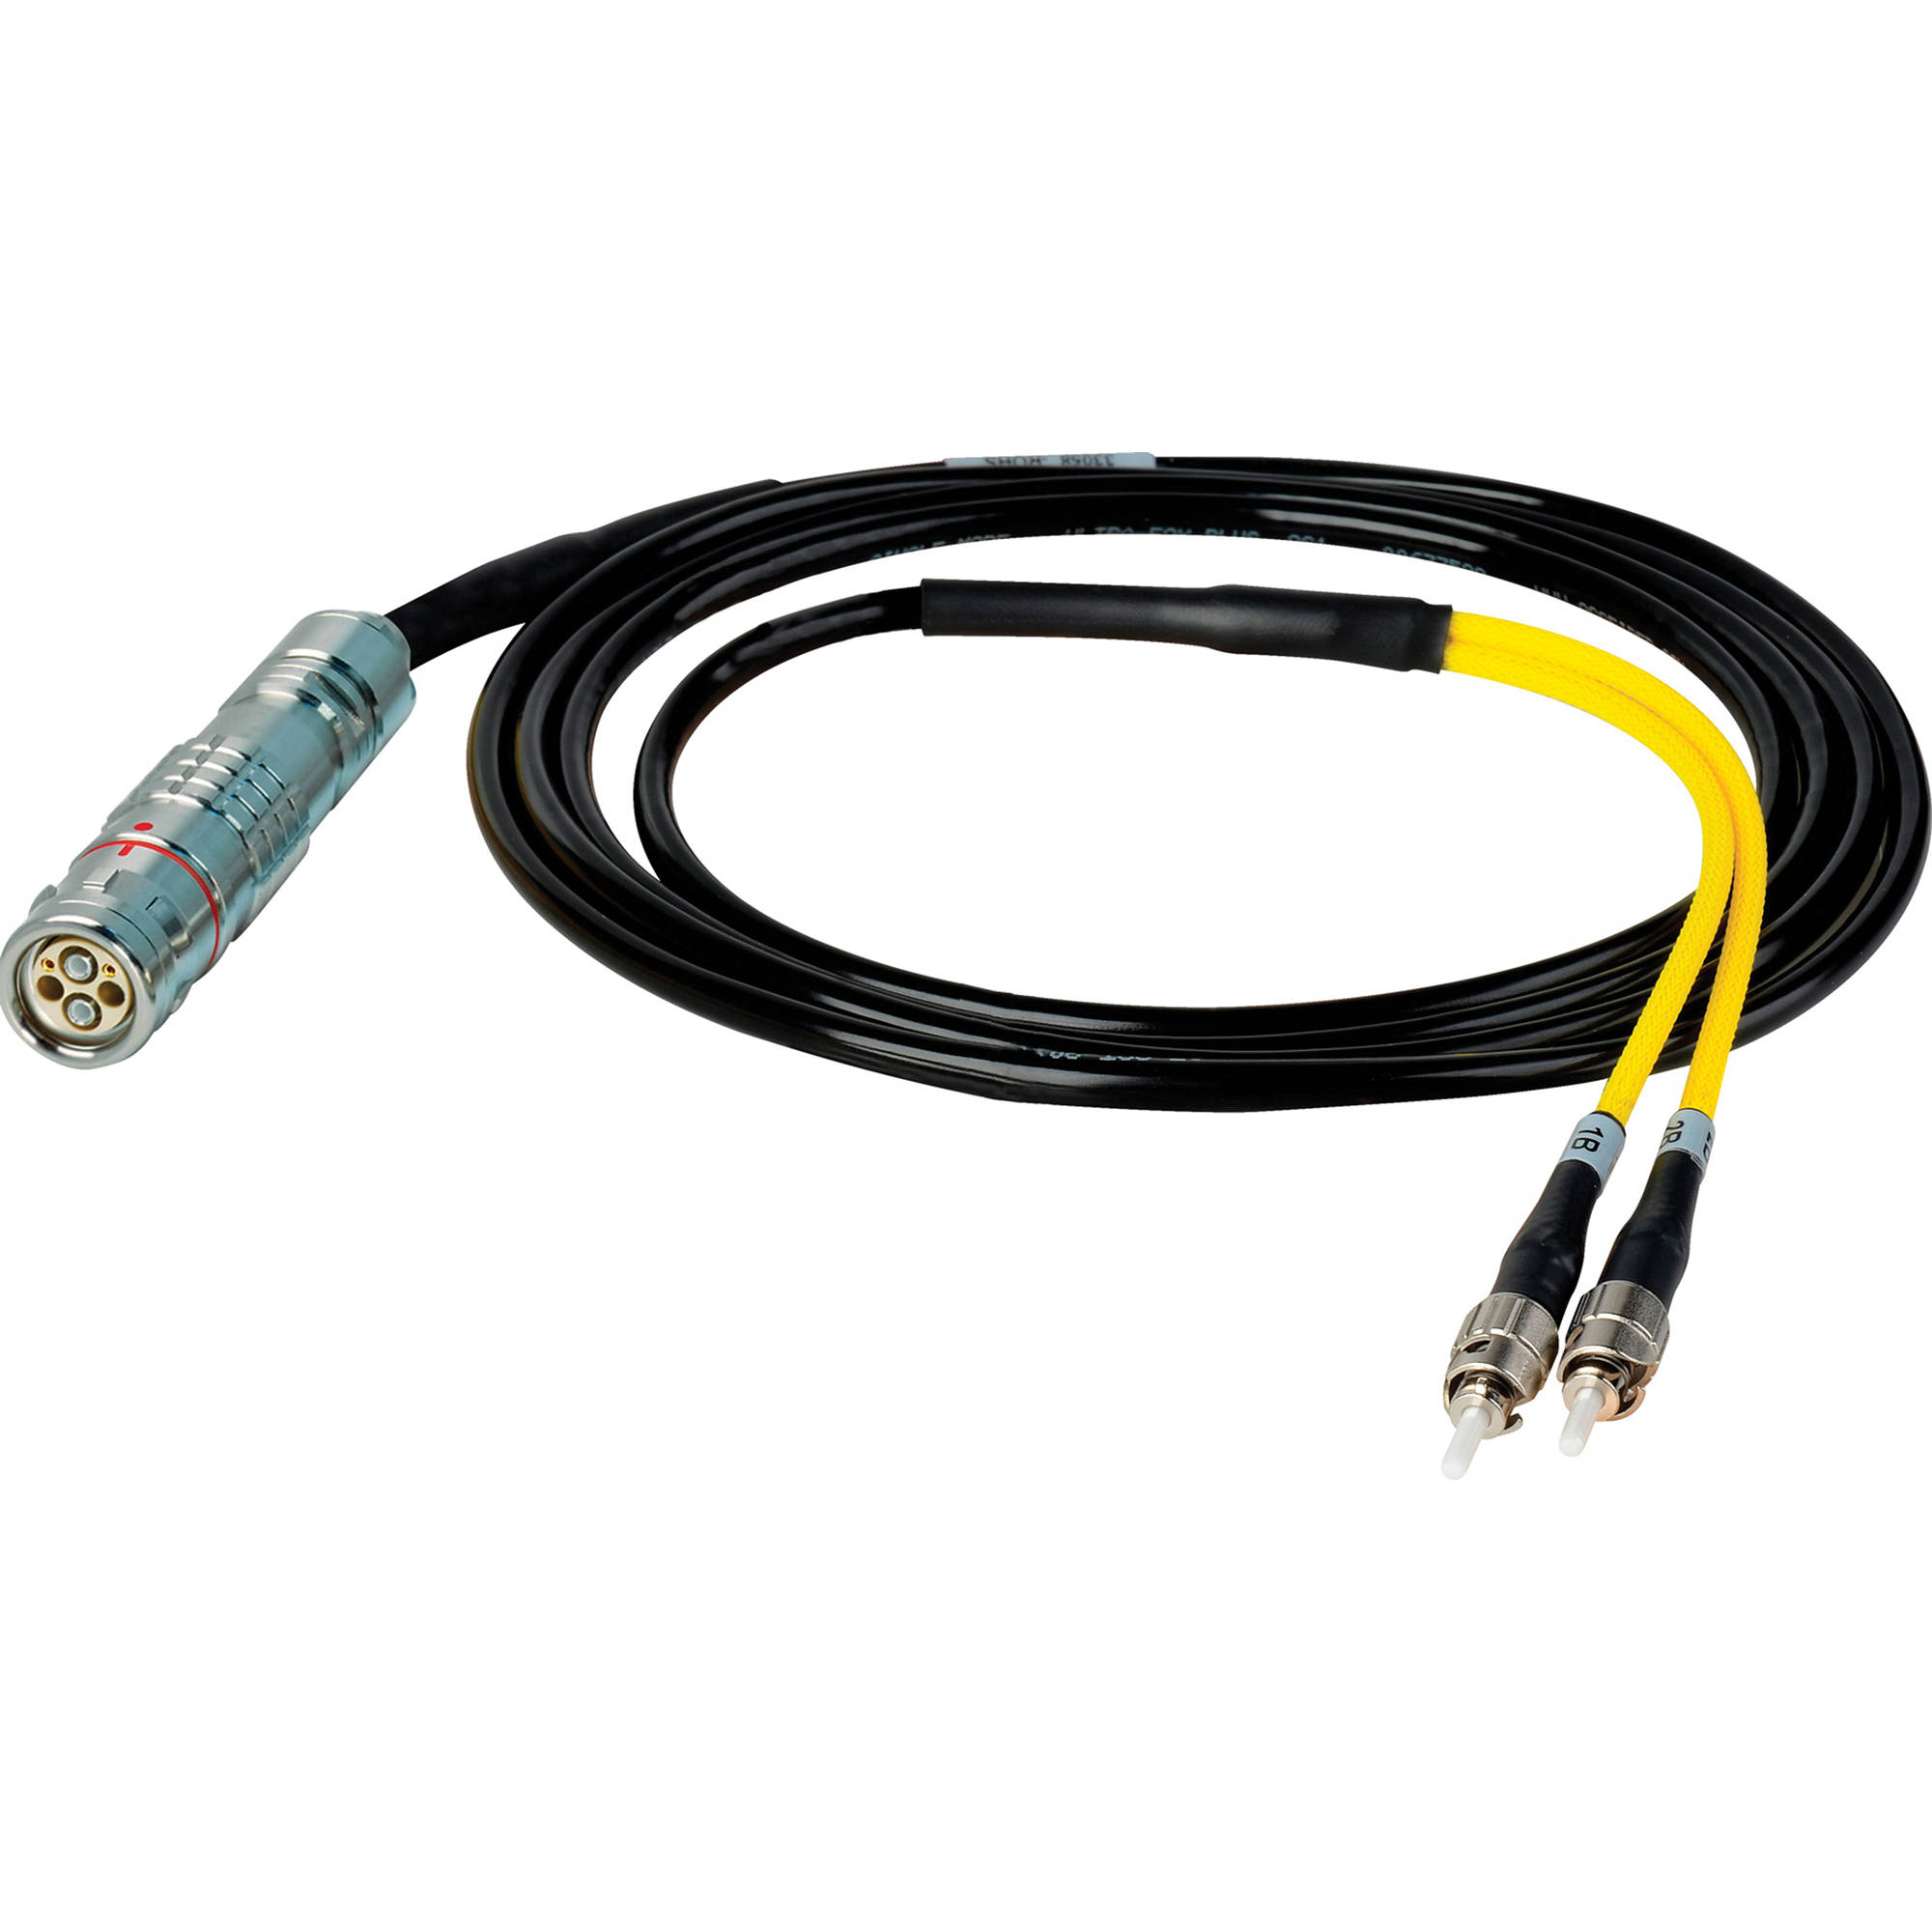 Camplex LEMO FUW to Dual ST In-Line Fiber Optic Breakout Cable - 50 Foot